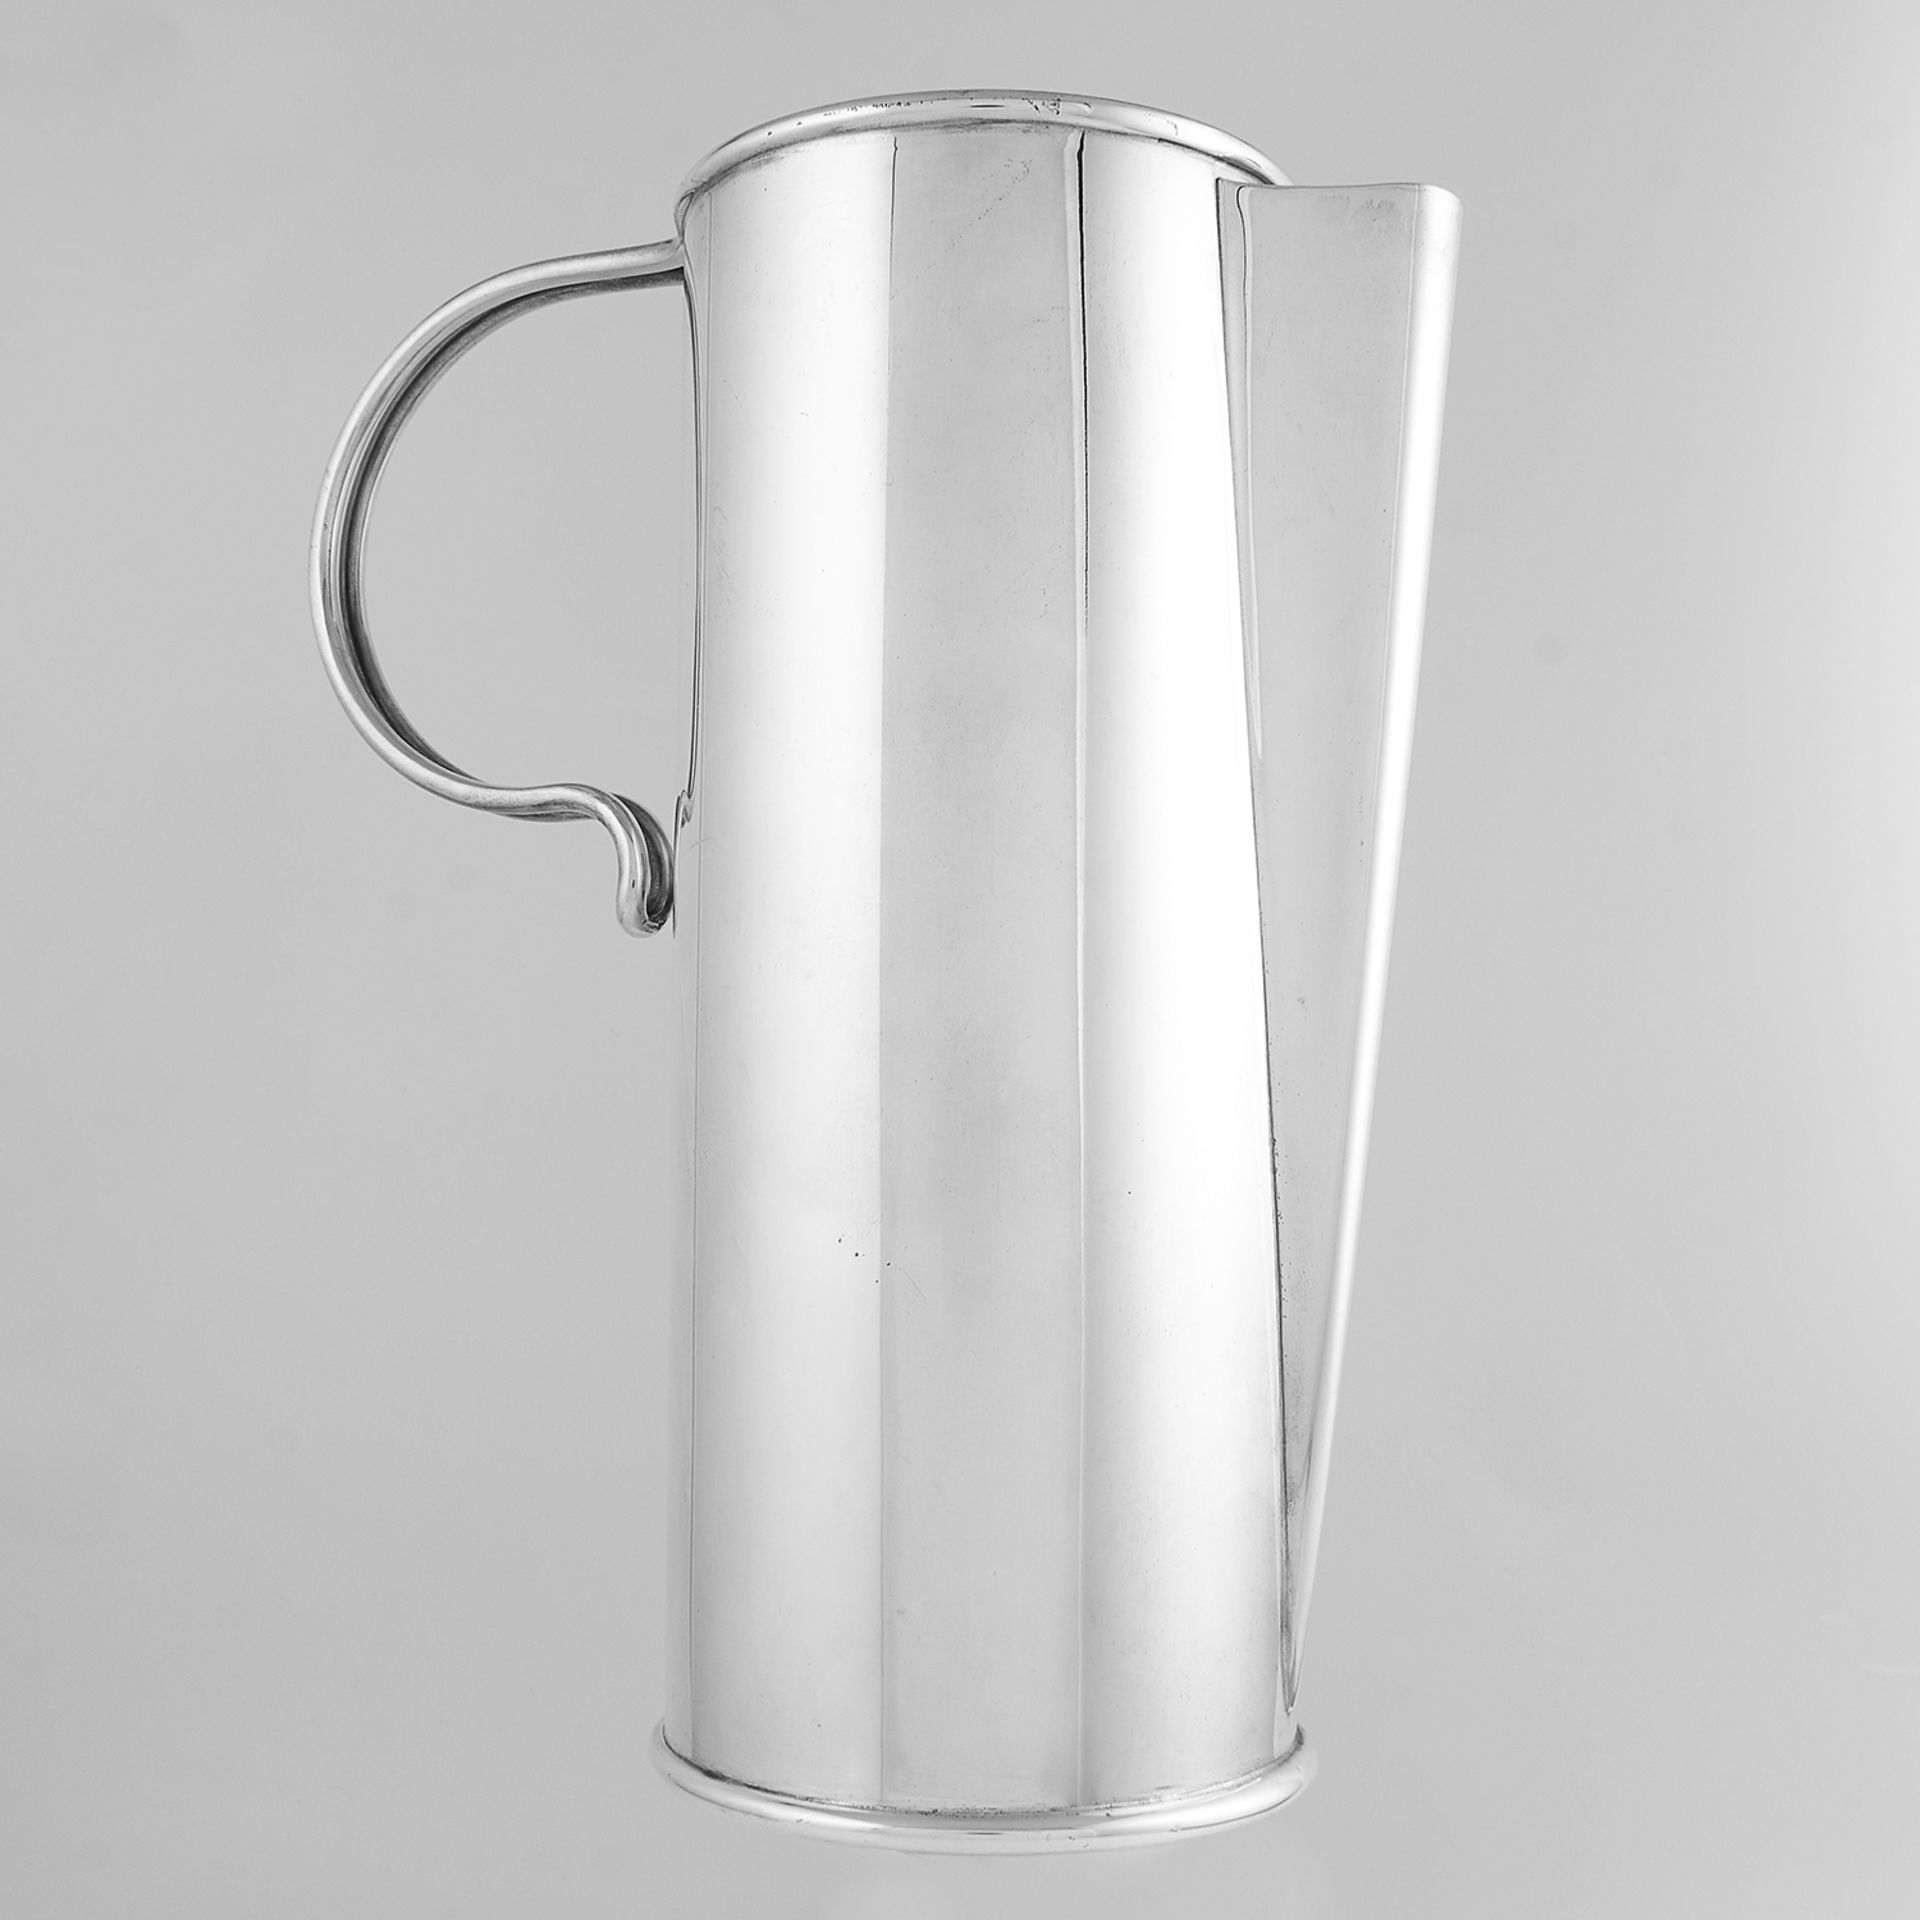 VINTAGE ITALIAN STERLING SILVER EWER / WATER JUG CIRCA 1960 of plain cylindrical form with a